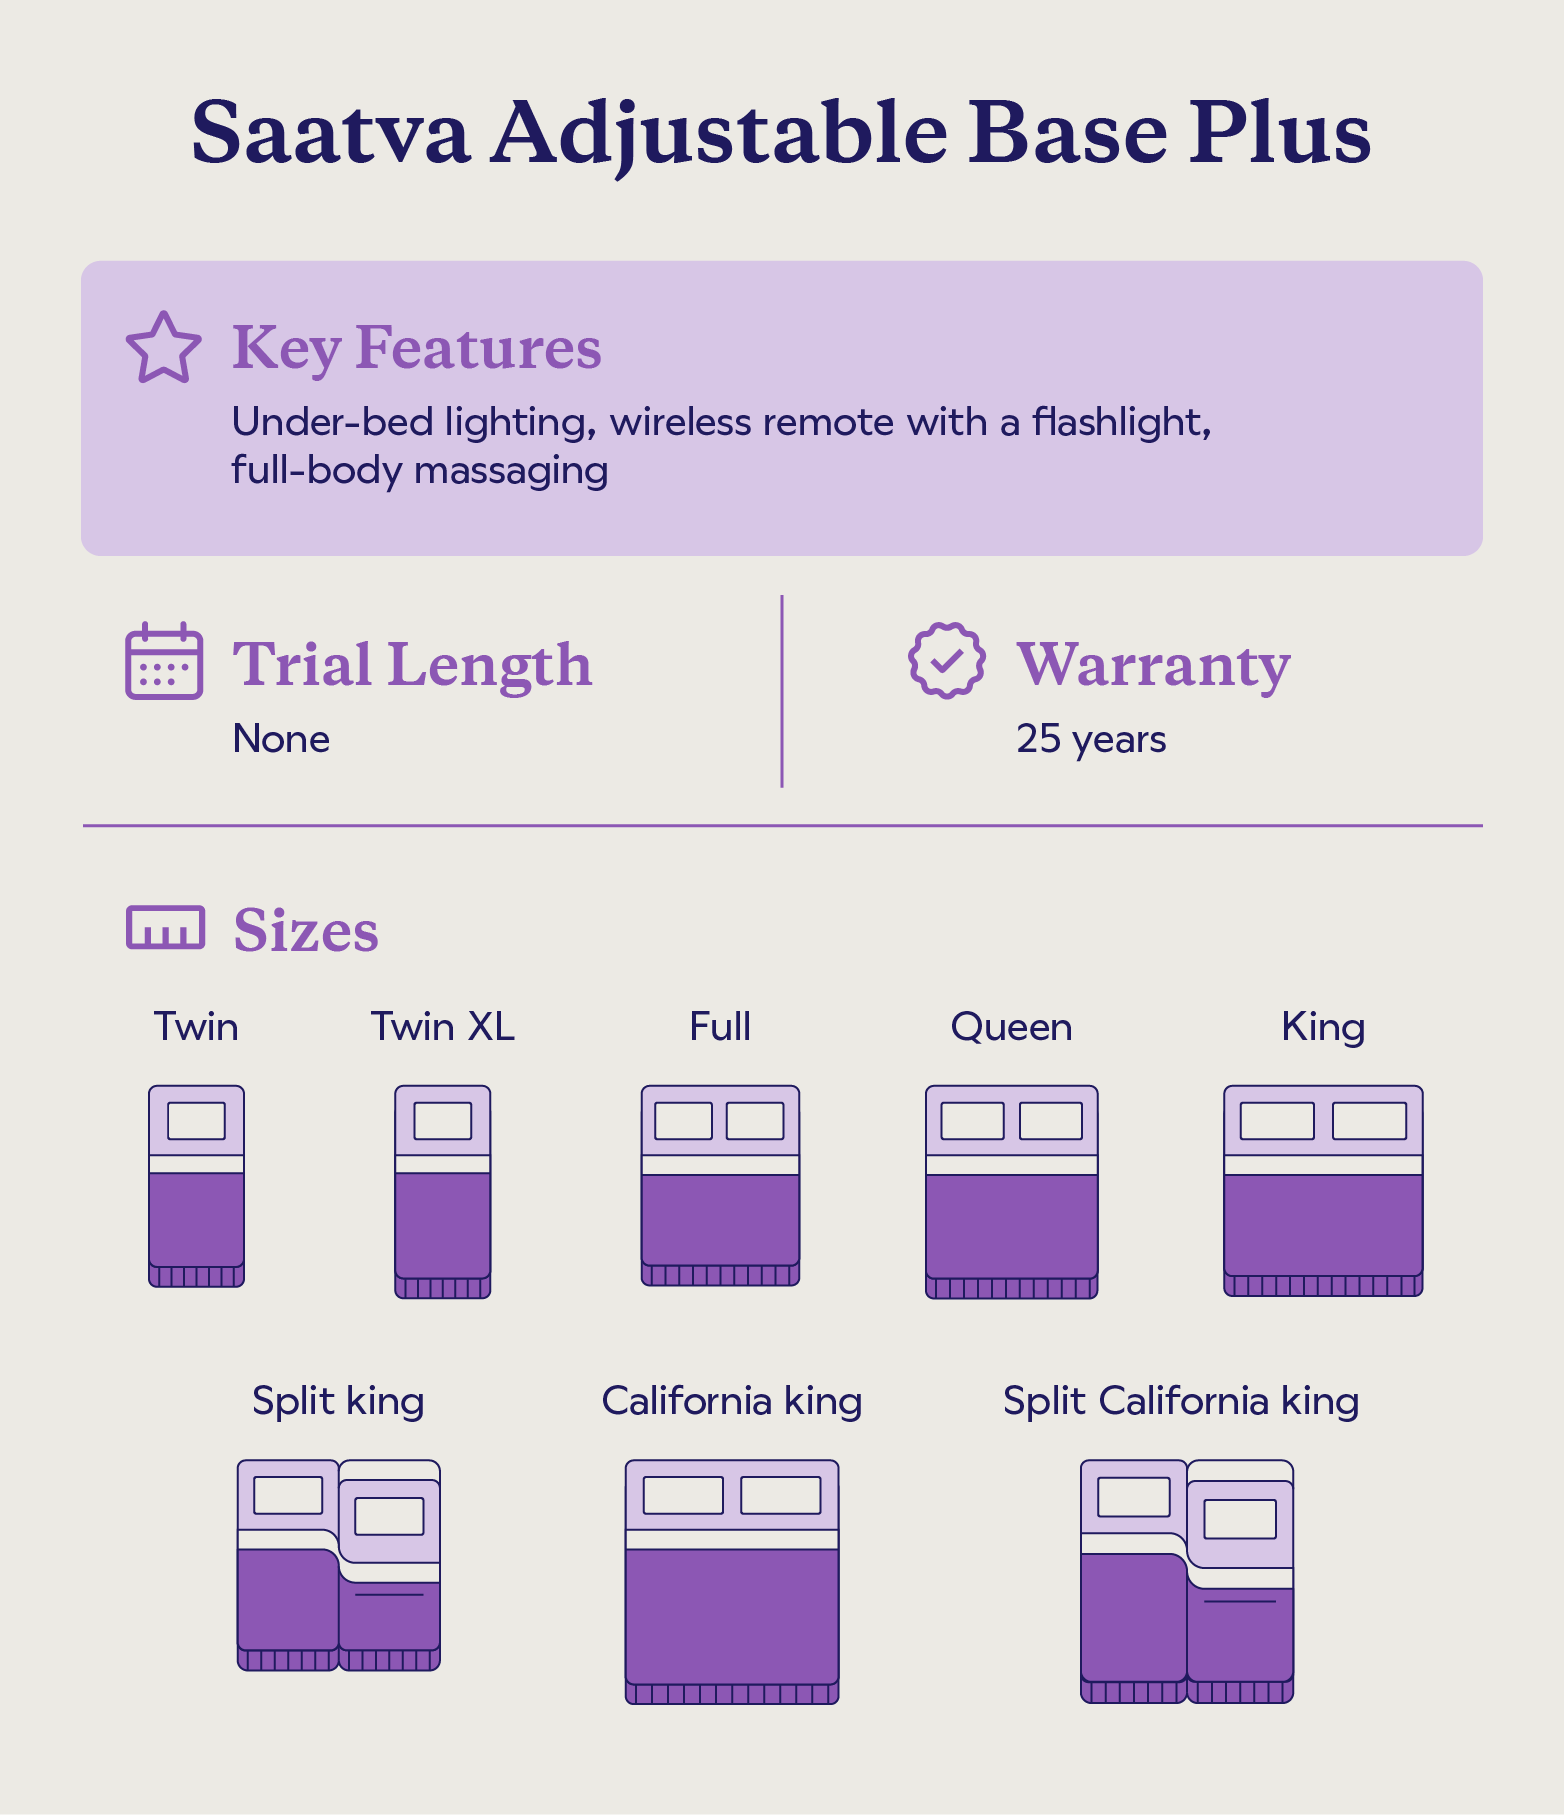 Key features and sizes of the Saatva Adjustable Base Plus.